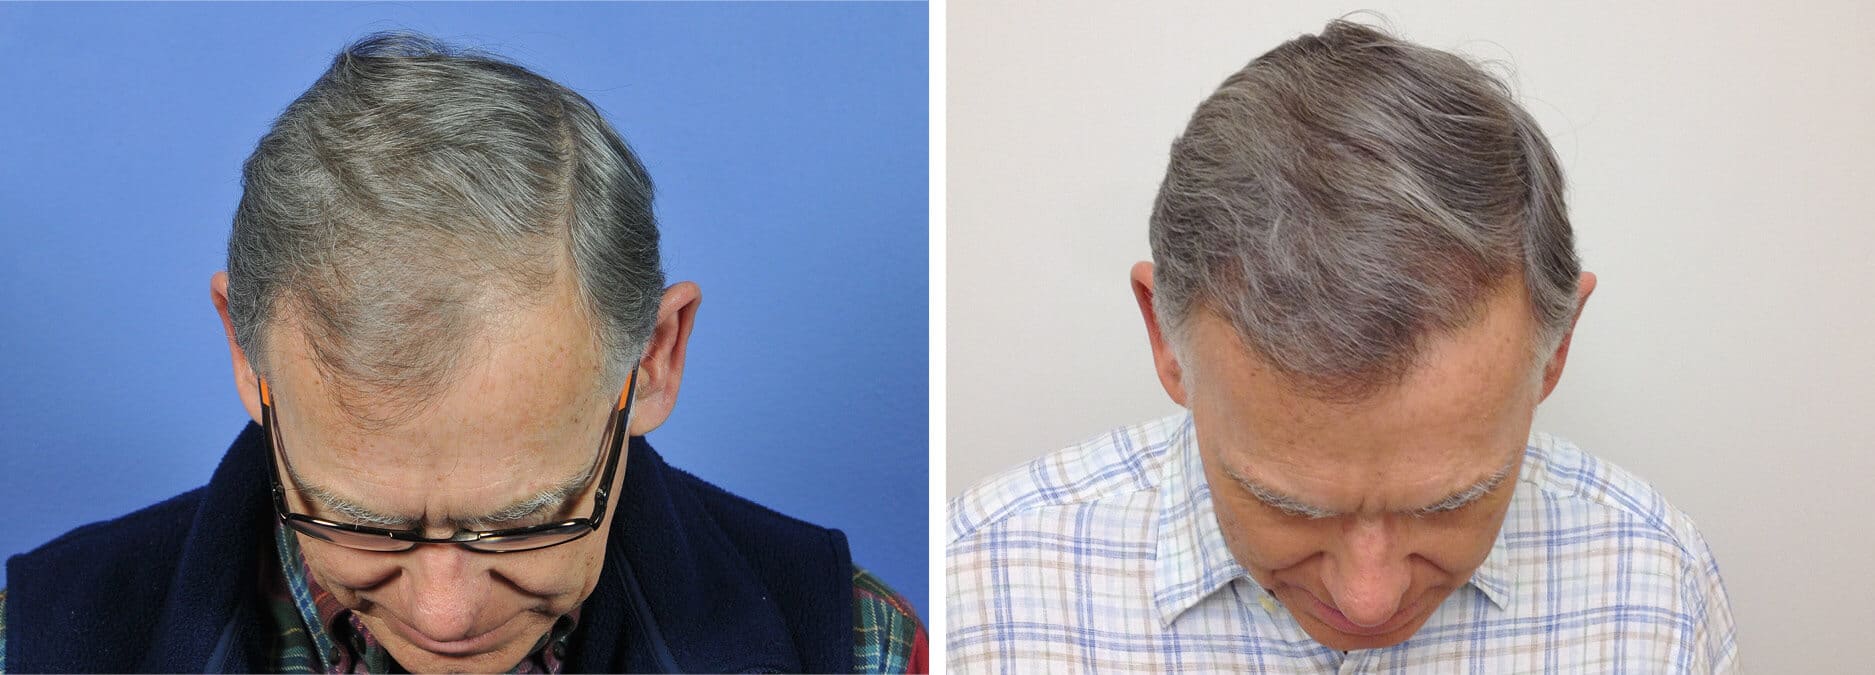 2298 Grafts 60 Yr Old Male Frontal Hair Transplantation Before and After  Photos Gallery Oregon